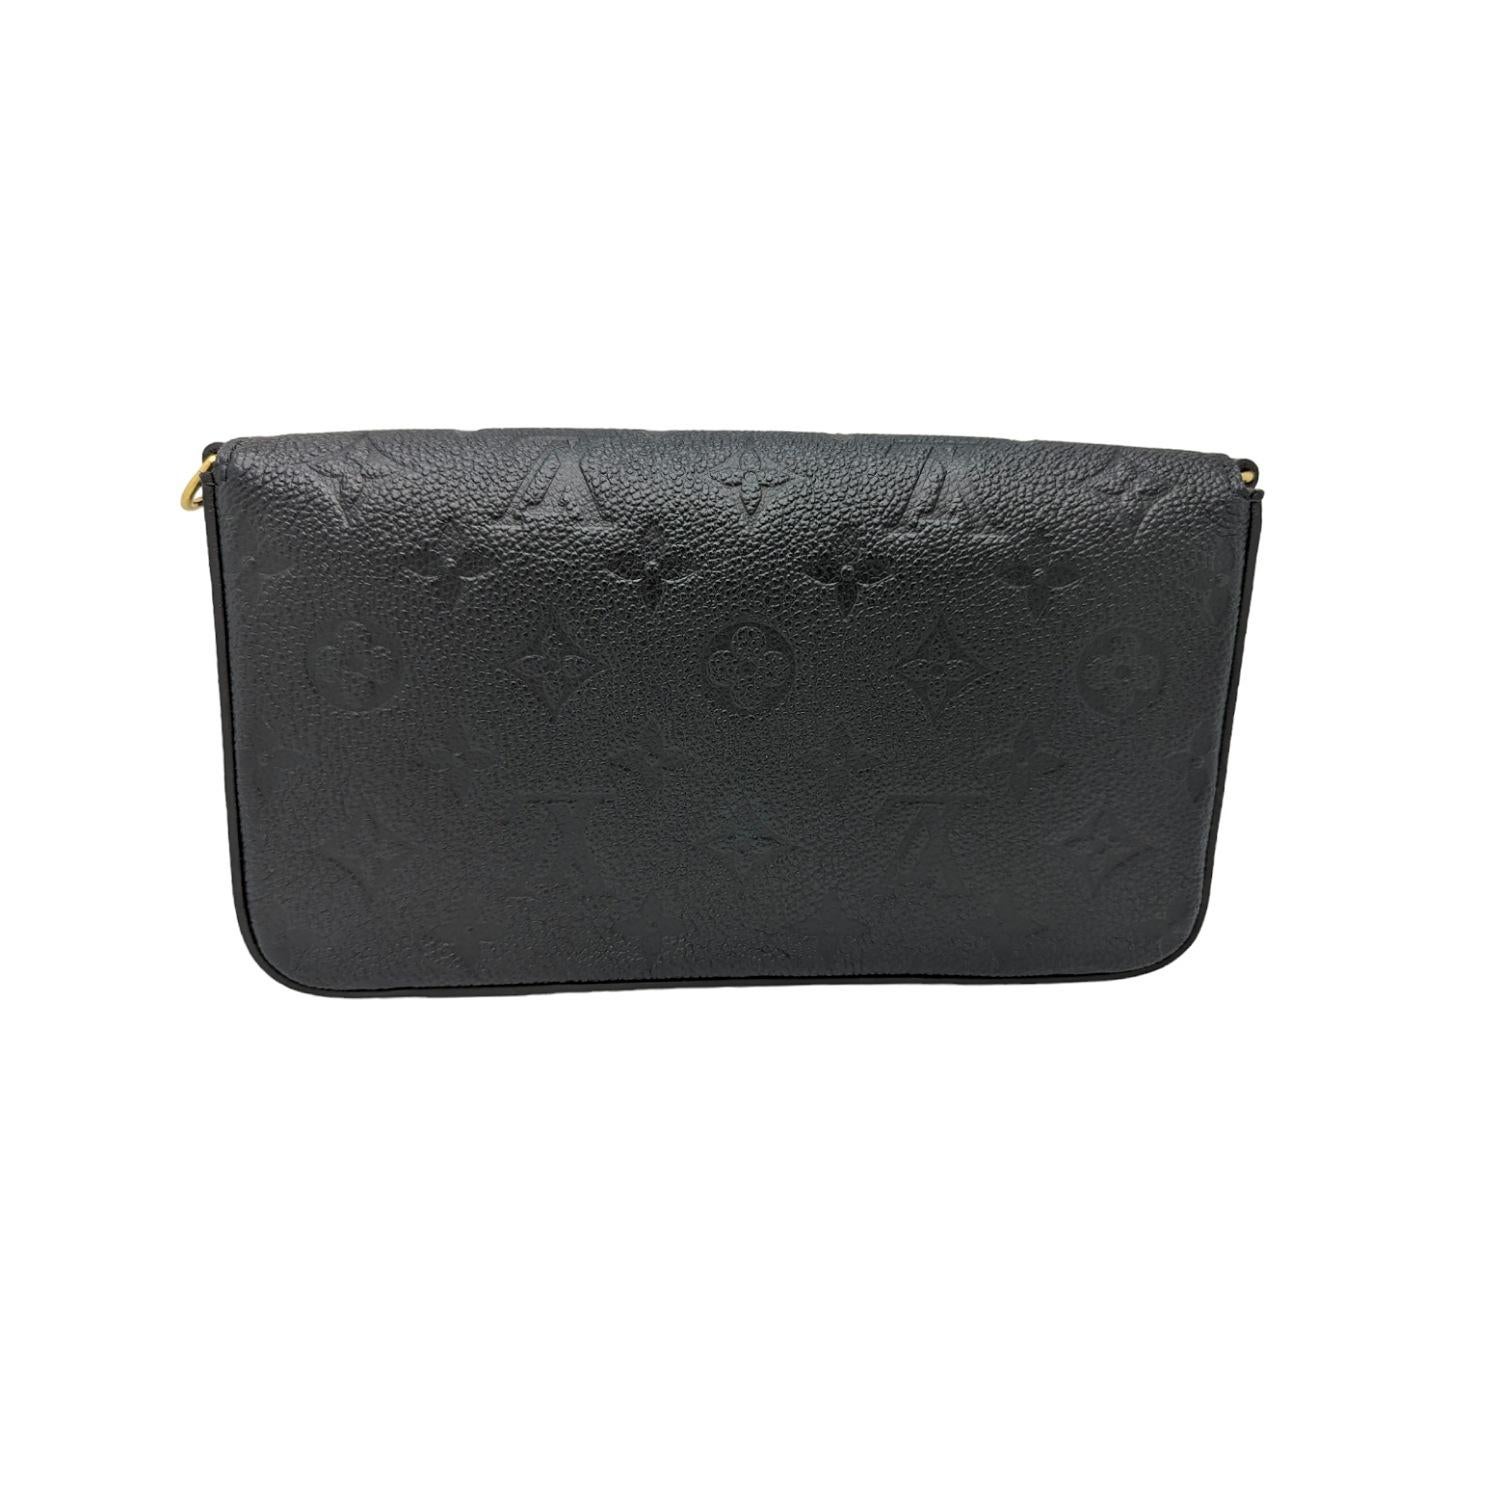 This chic clutch is crafted of black calfskin leather embossed with the Louis Vuitton monogram. The bag features an envelope-style front flap that unsnaps to a black fabric interior with a patch pocket.

Designer: Louis Vuitton
Material: Monogram